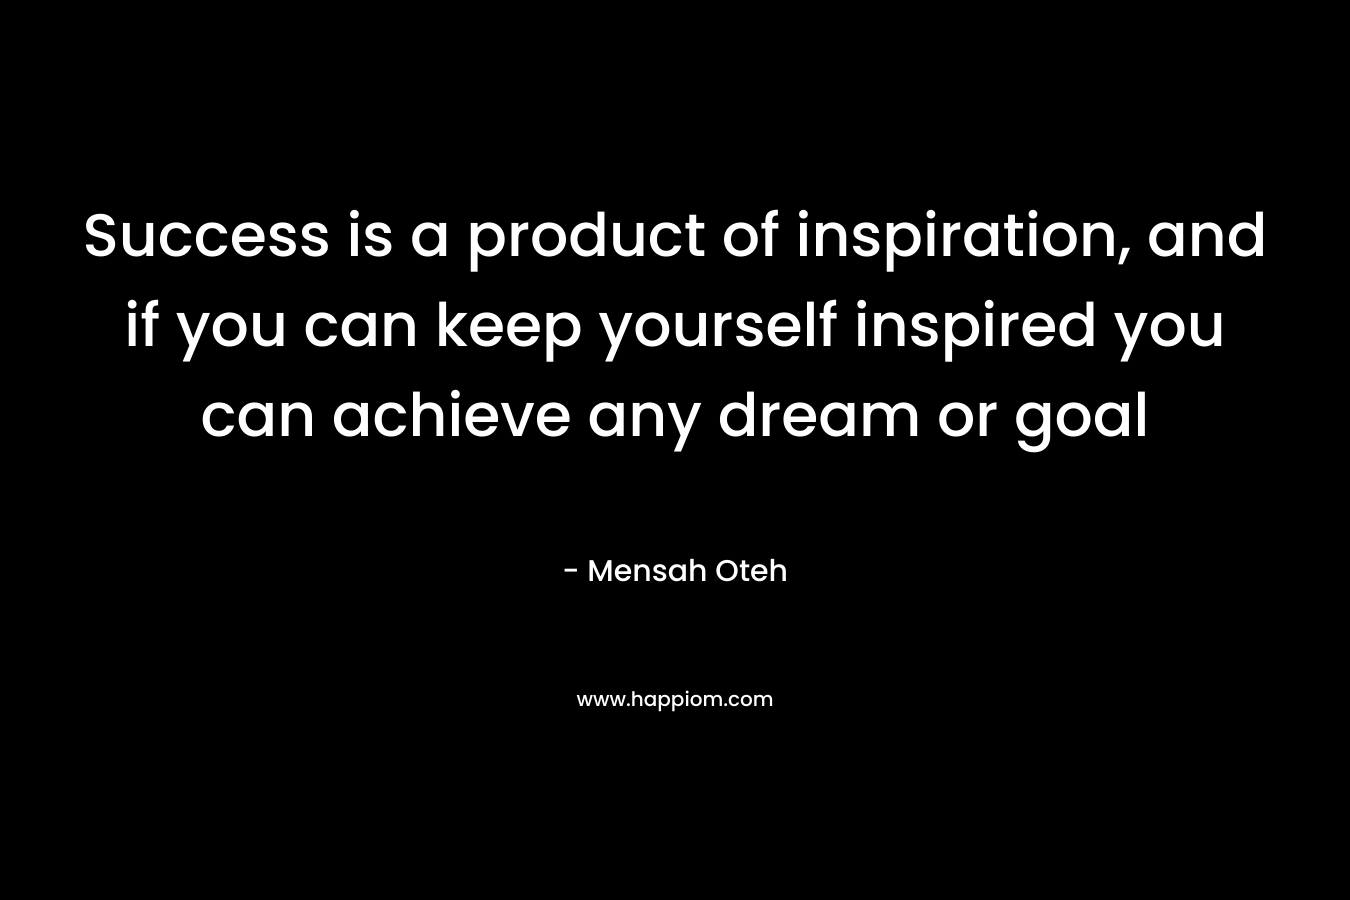 Success is a product of inspiration, and if you can keep yourself inspired you can achieve any dream or goal